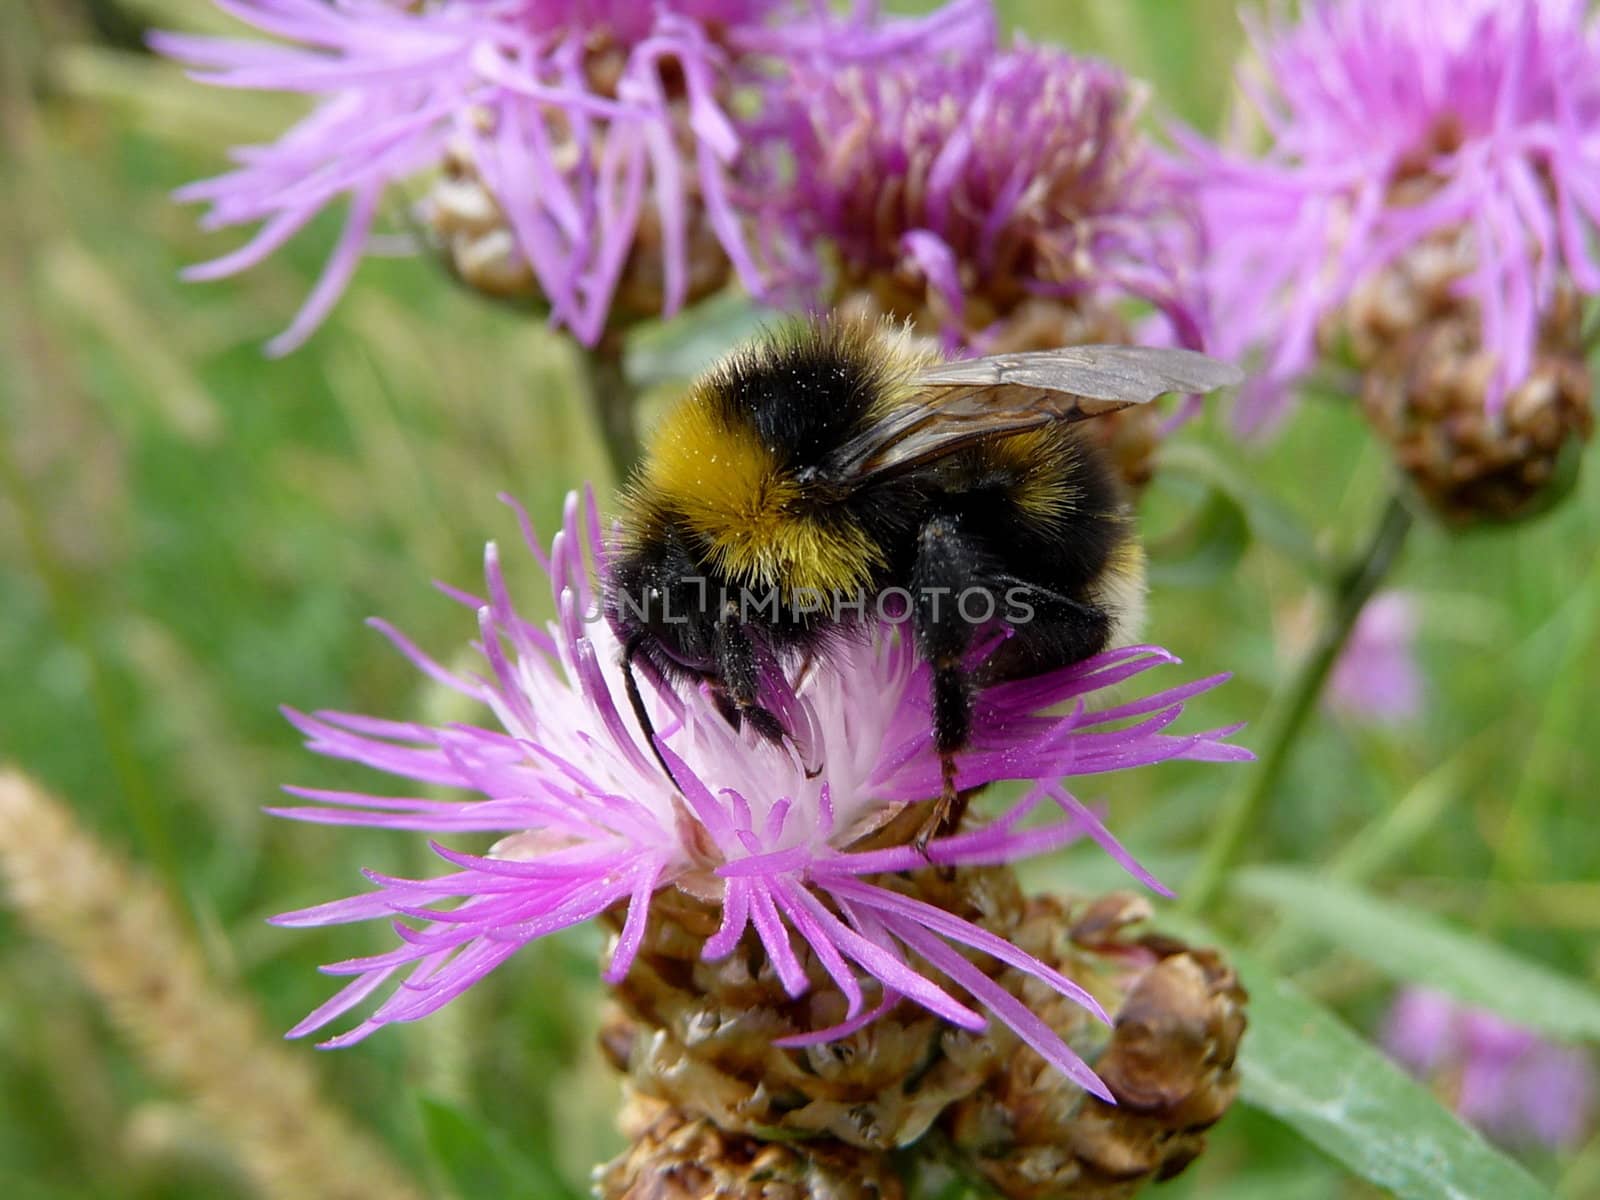 Large fuzzy bumblebee on the pink flower in field